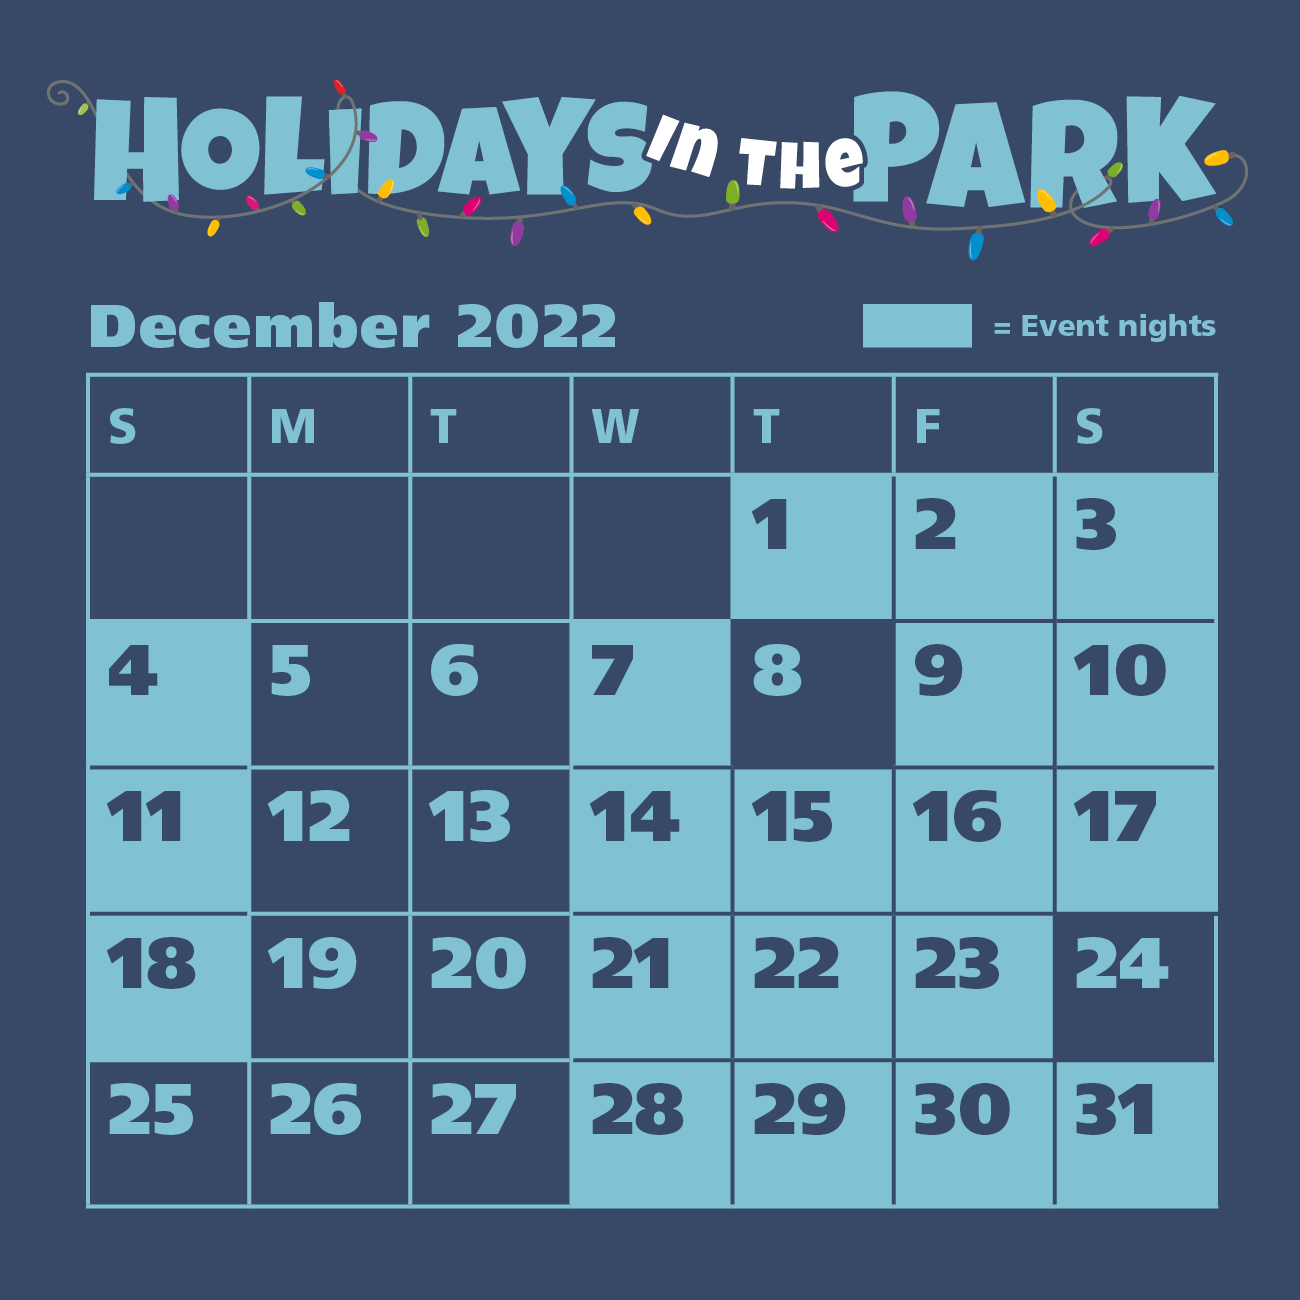 Schedule for Holidays in the Park